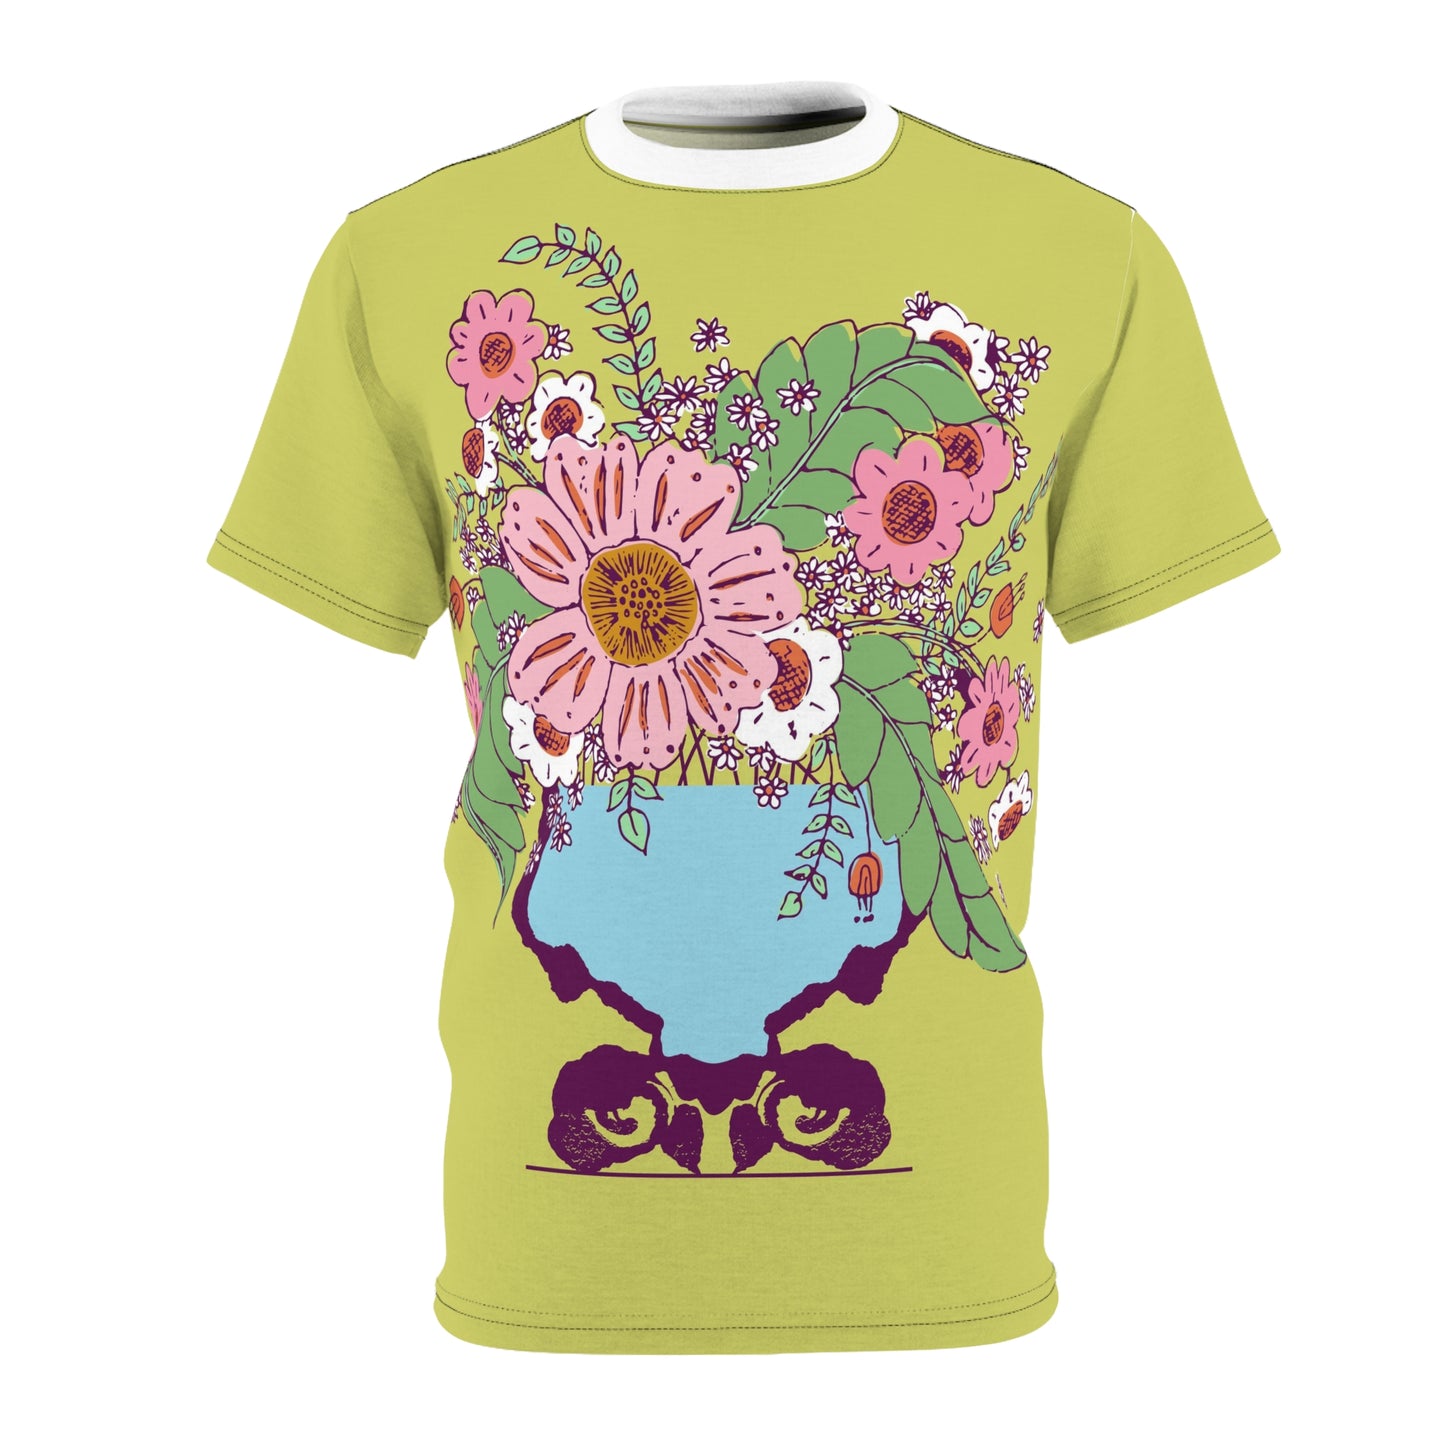 Cheerful Watercolor Flowers in Vase on Bright Green Tee